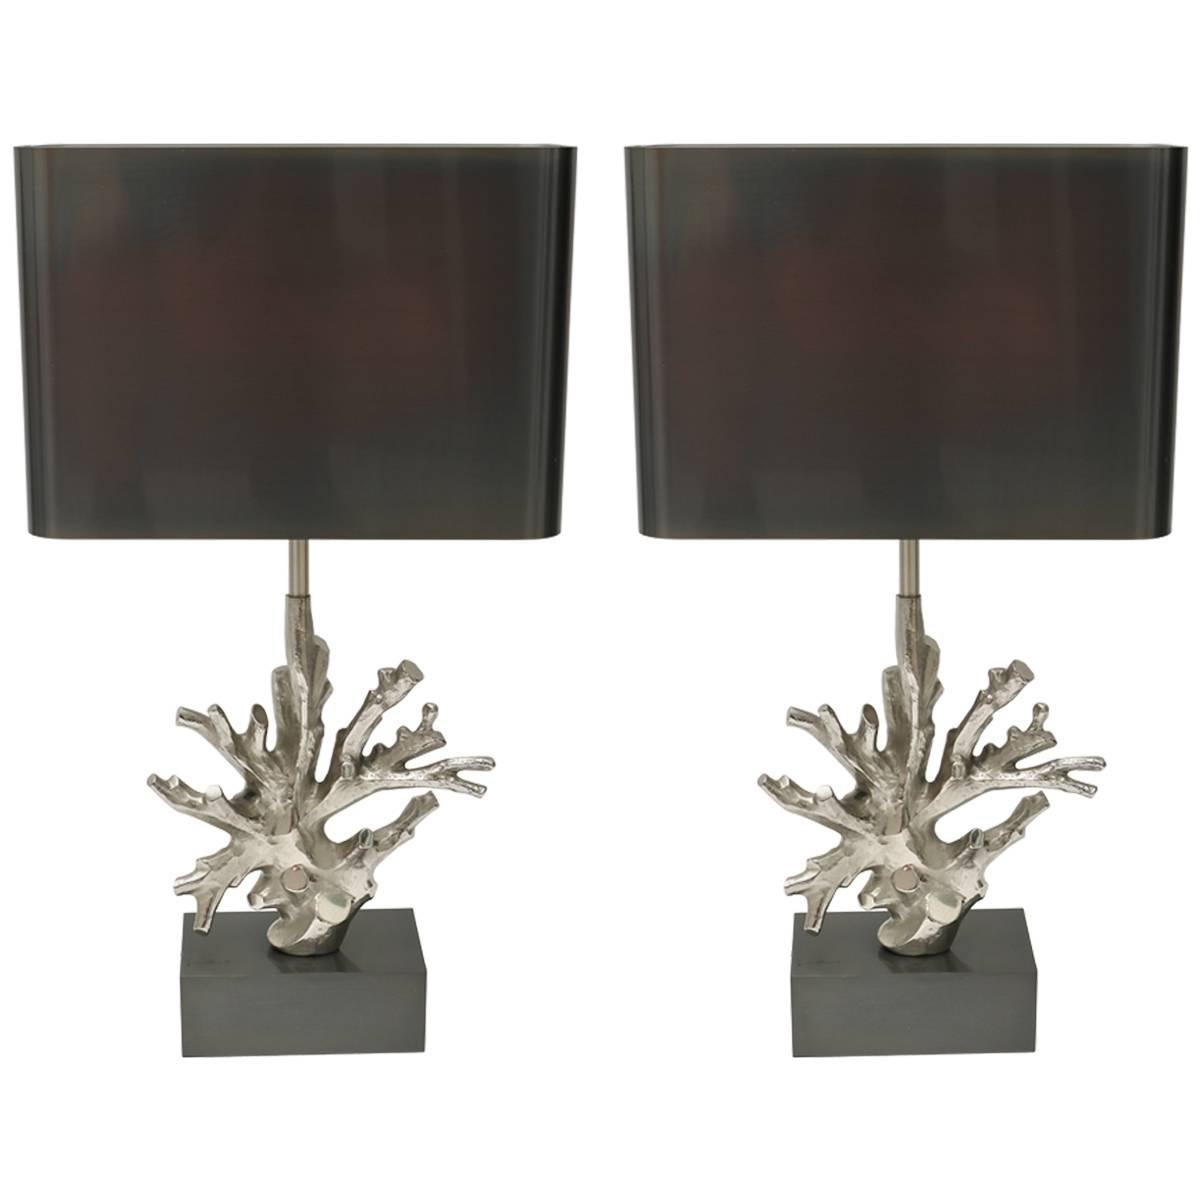 Pair of Coral-Form Table Lamps in Silver and Gunmetal Coloration